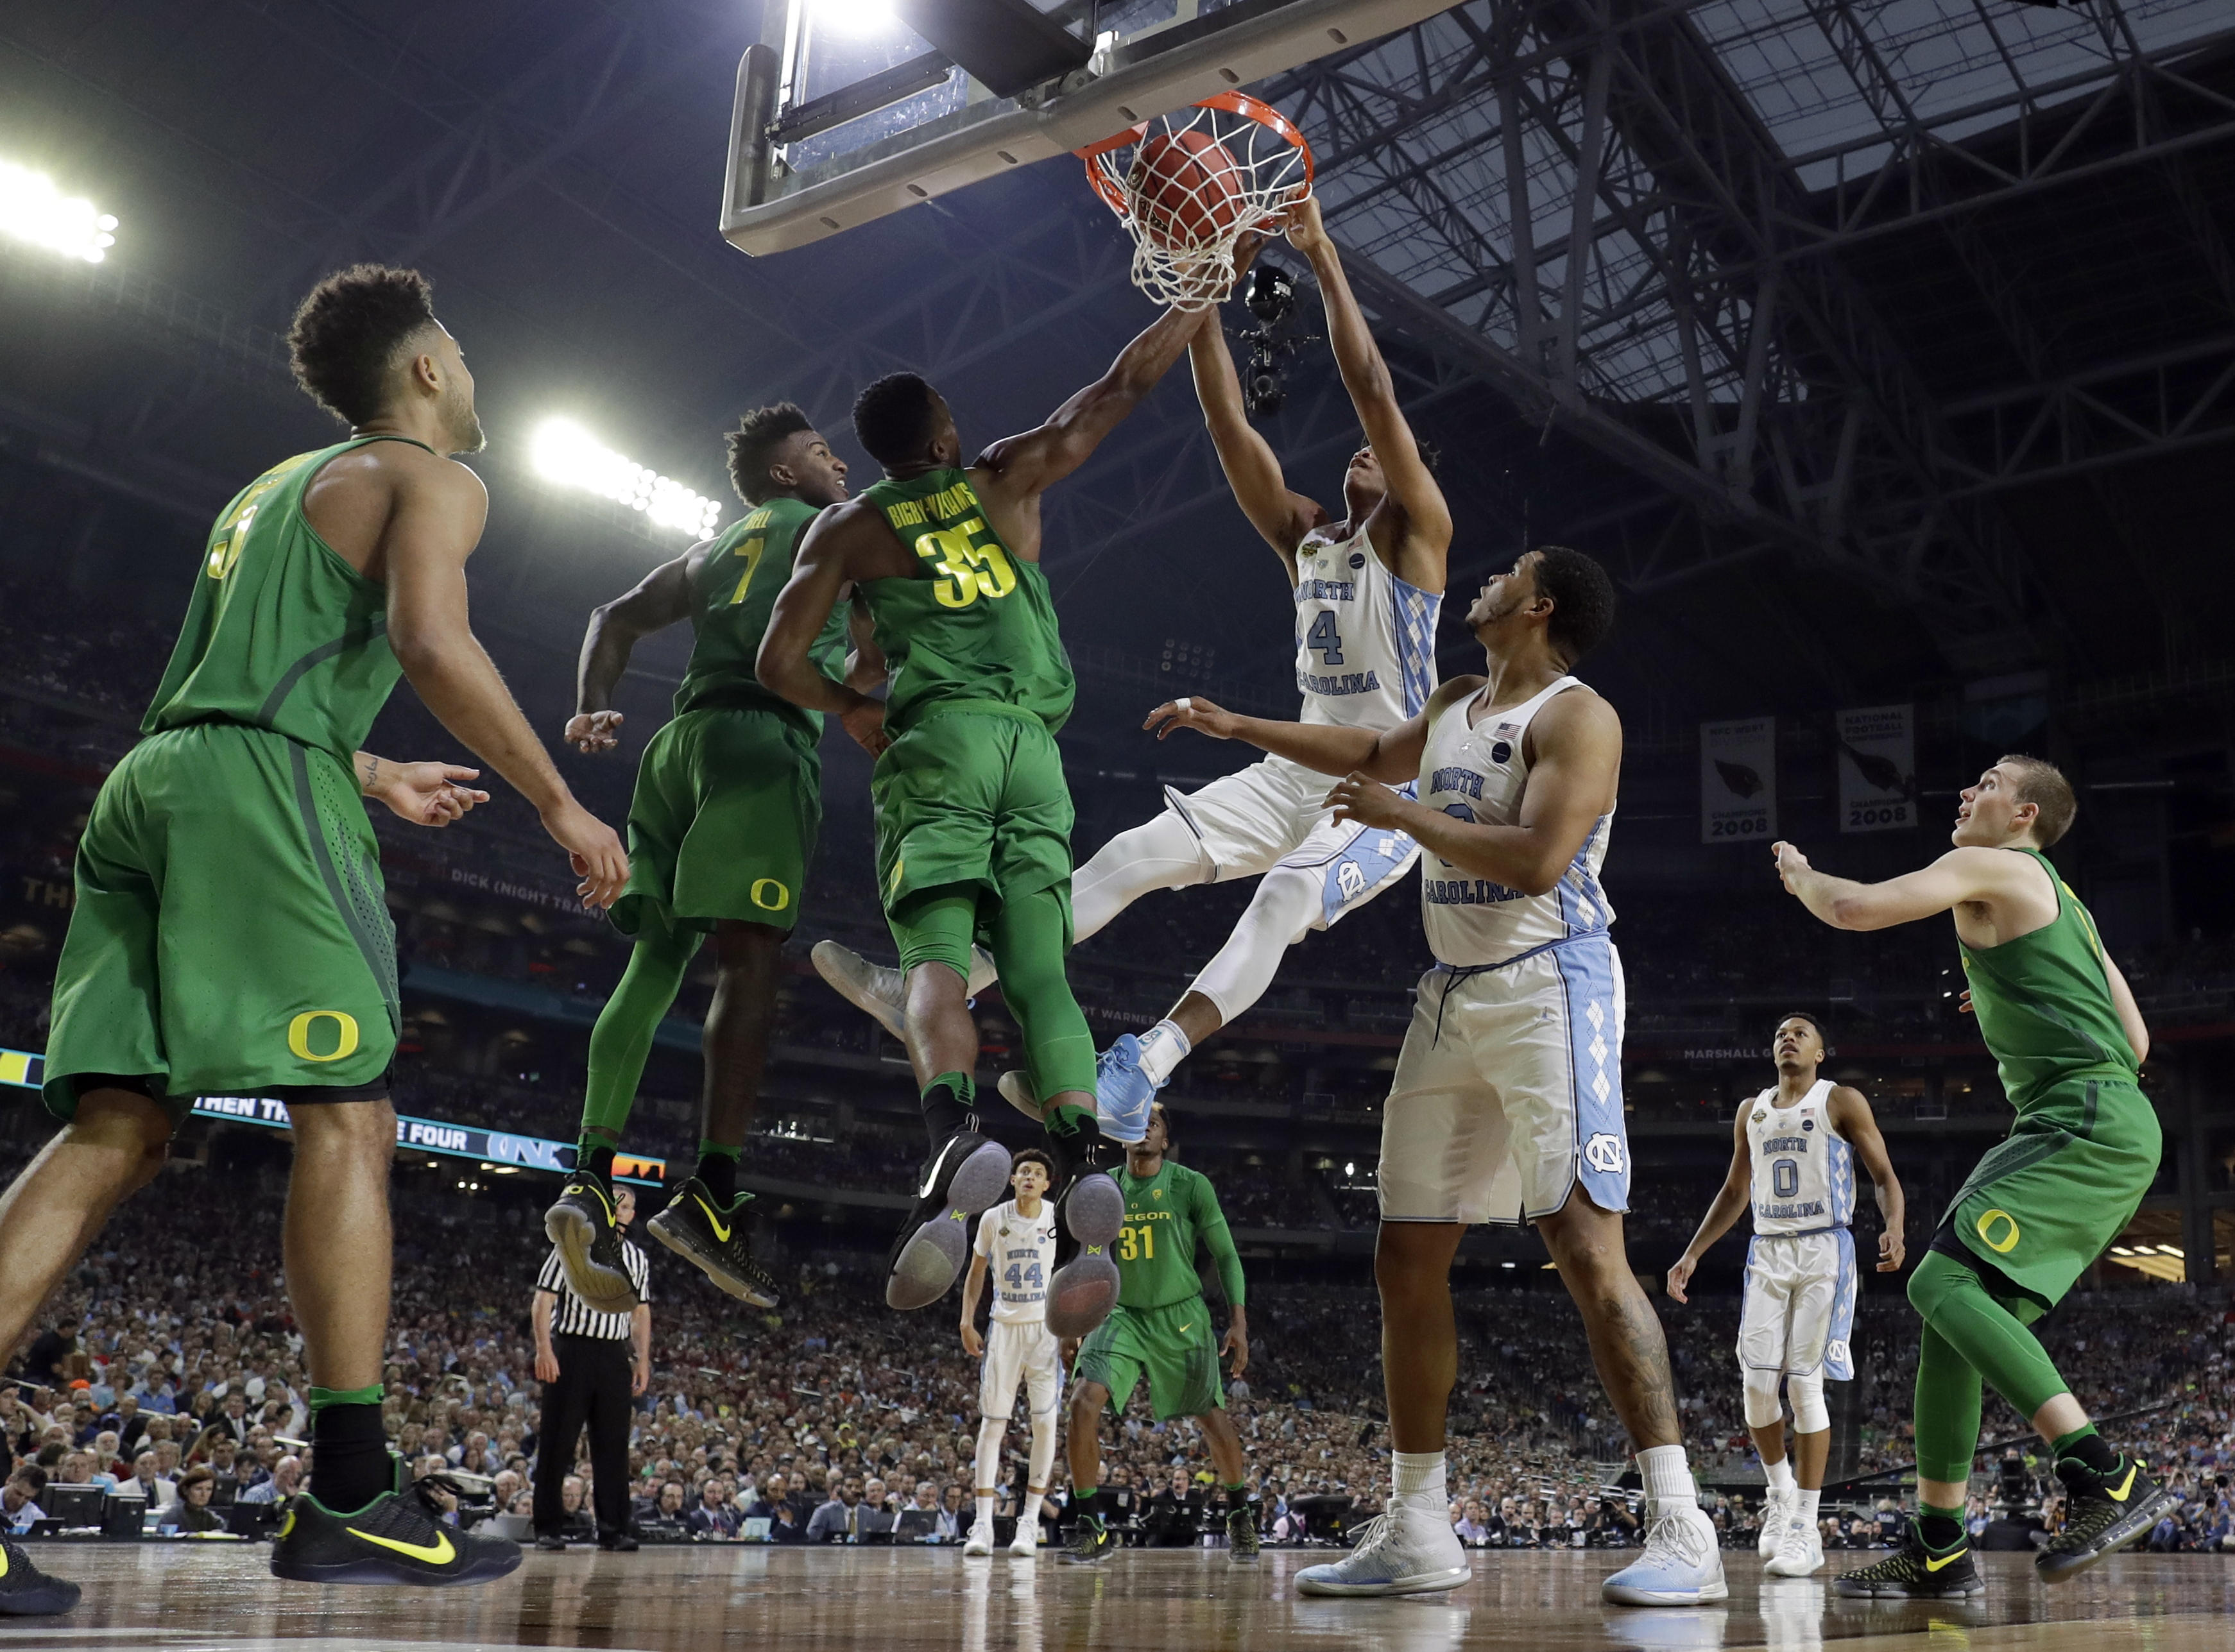 UNC heads to finals despite missing 4 straight free throws at end of game - CBS News3483 x 2575